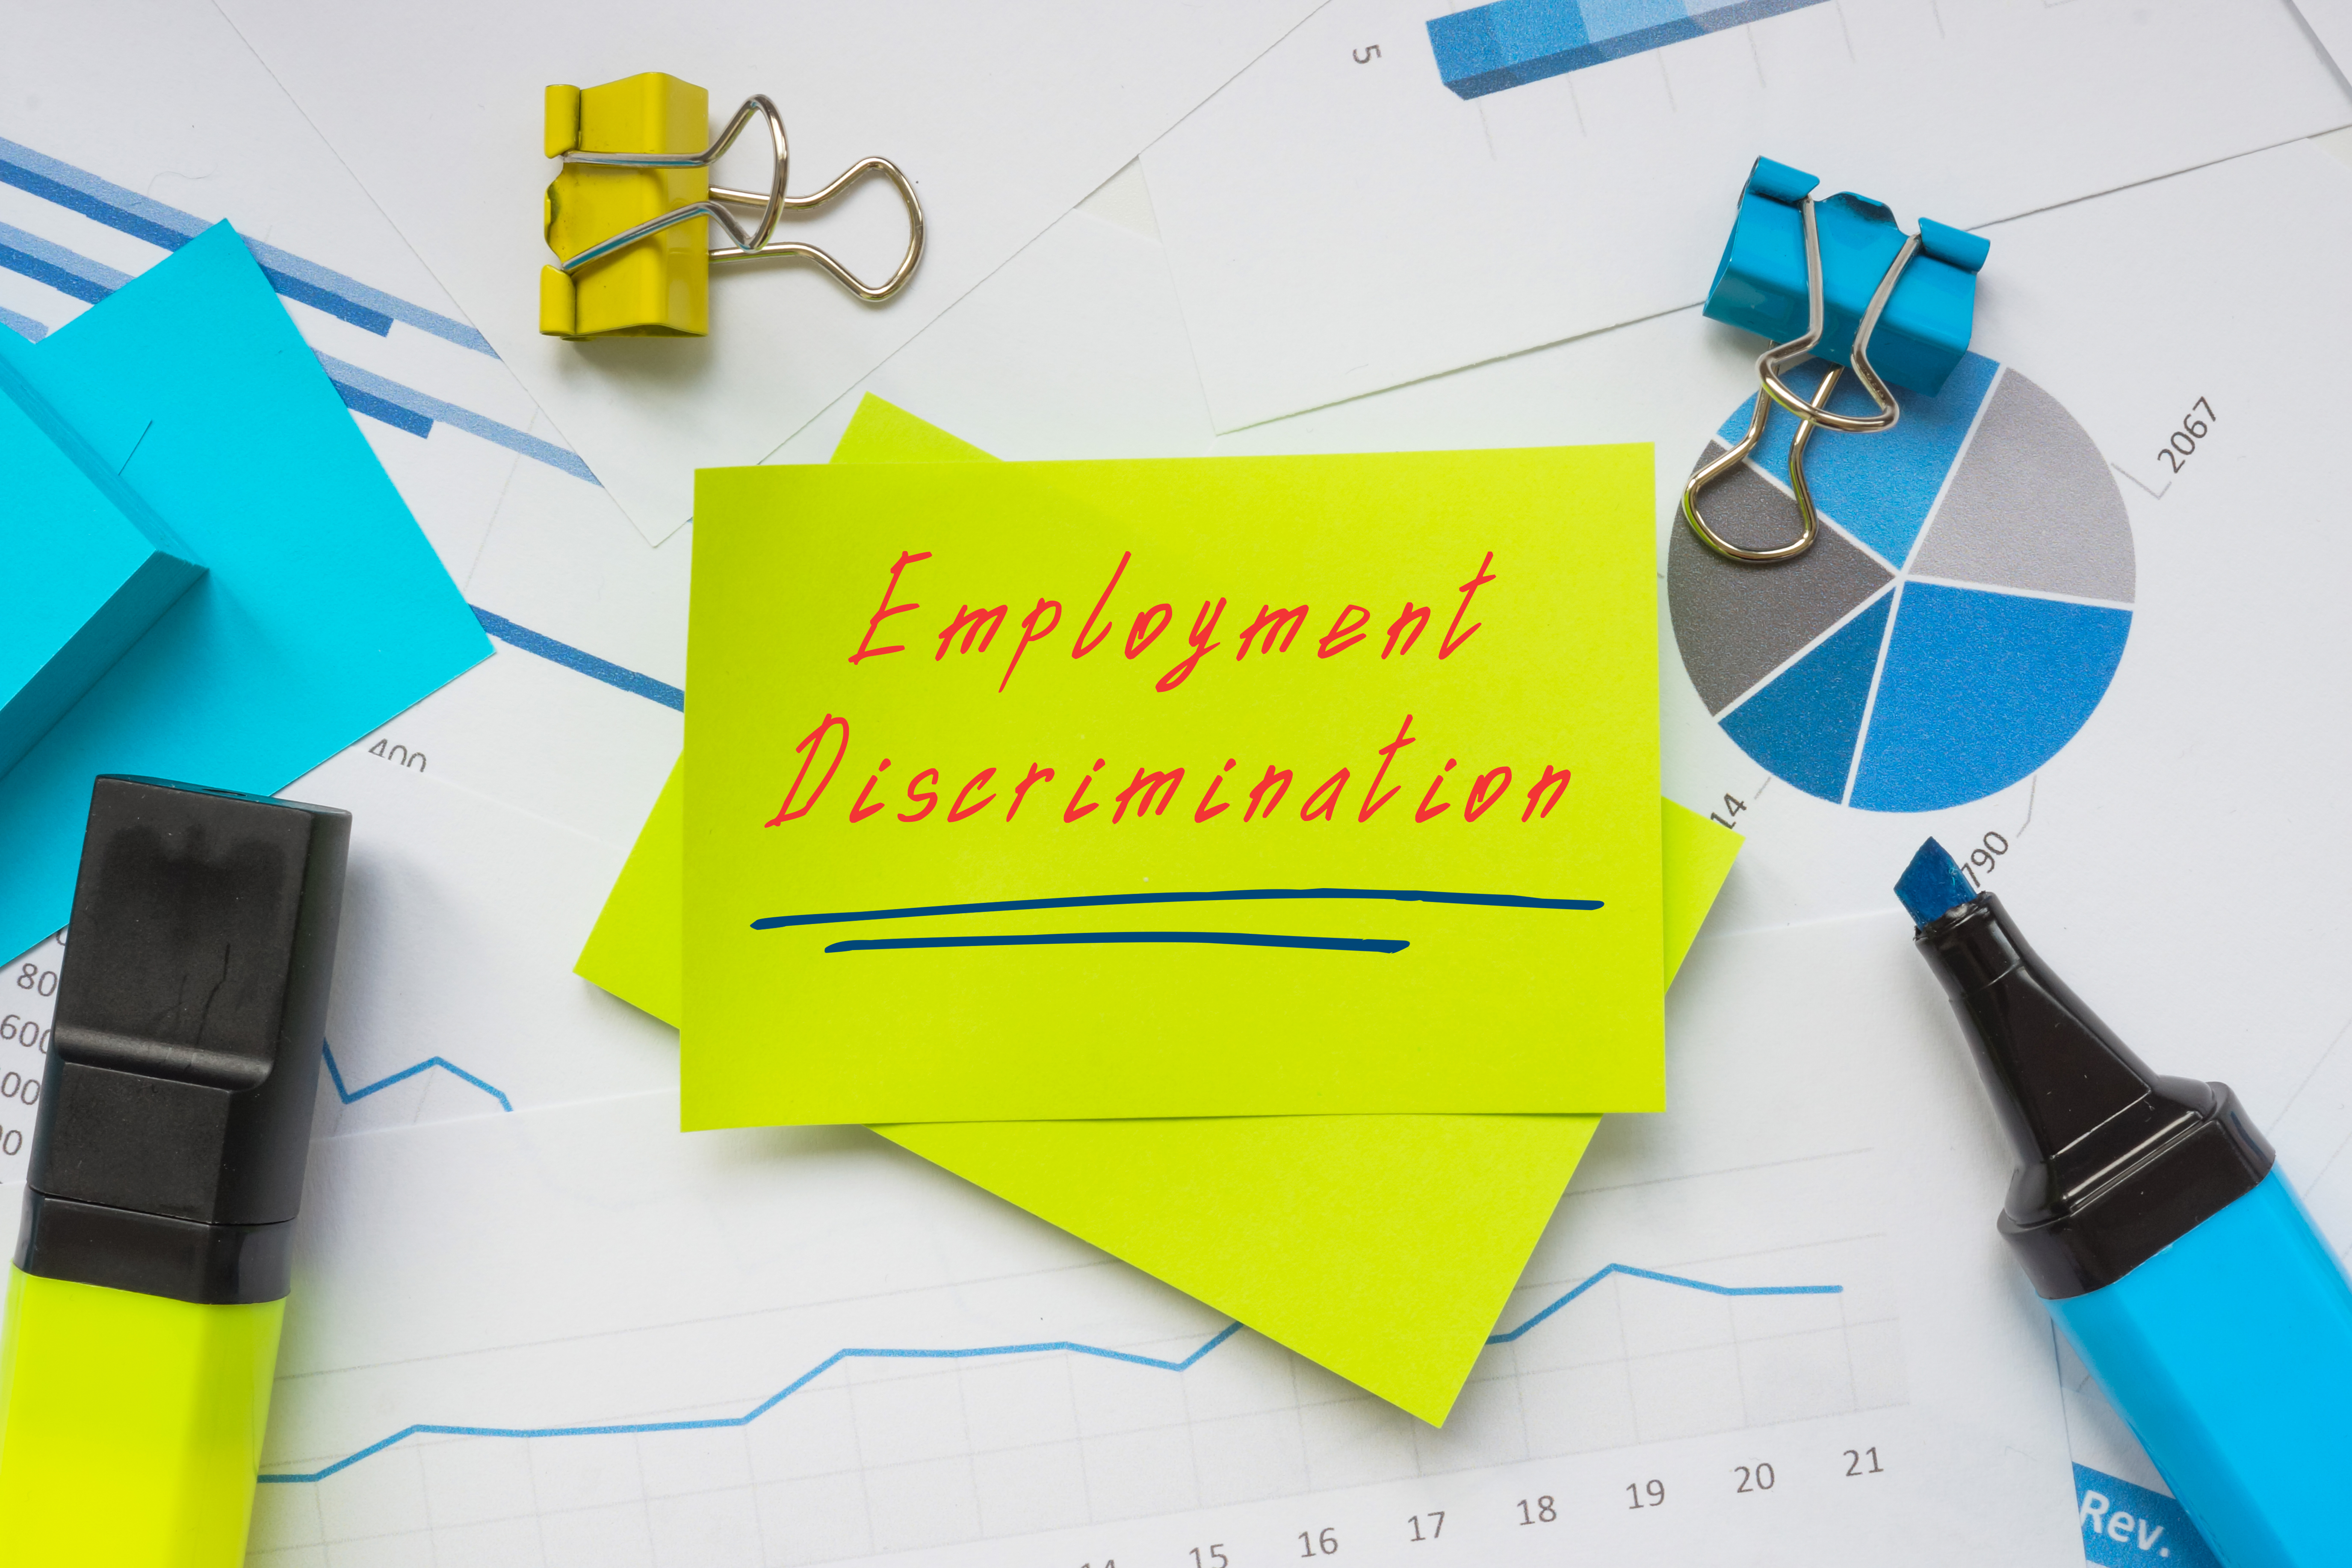 EEOC Issues Updated Workplace Discrimination Poster